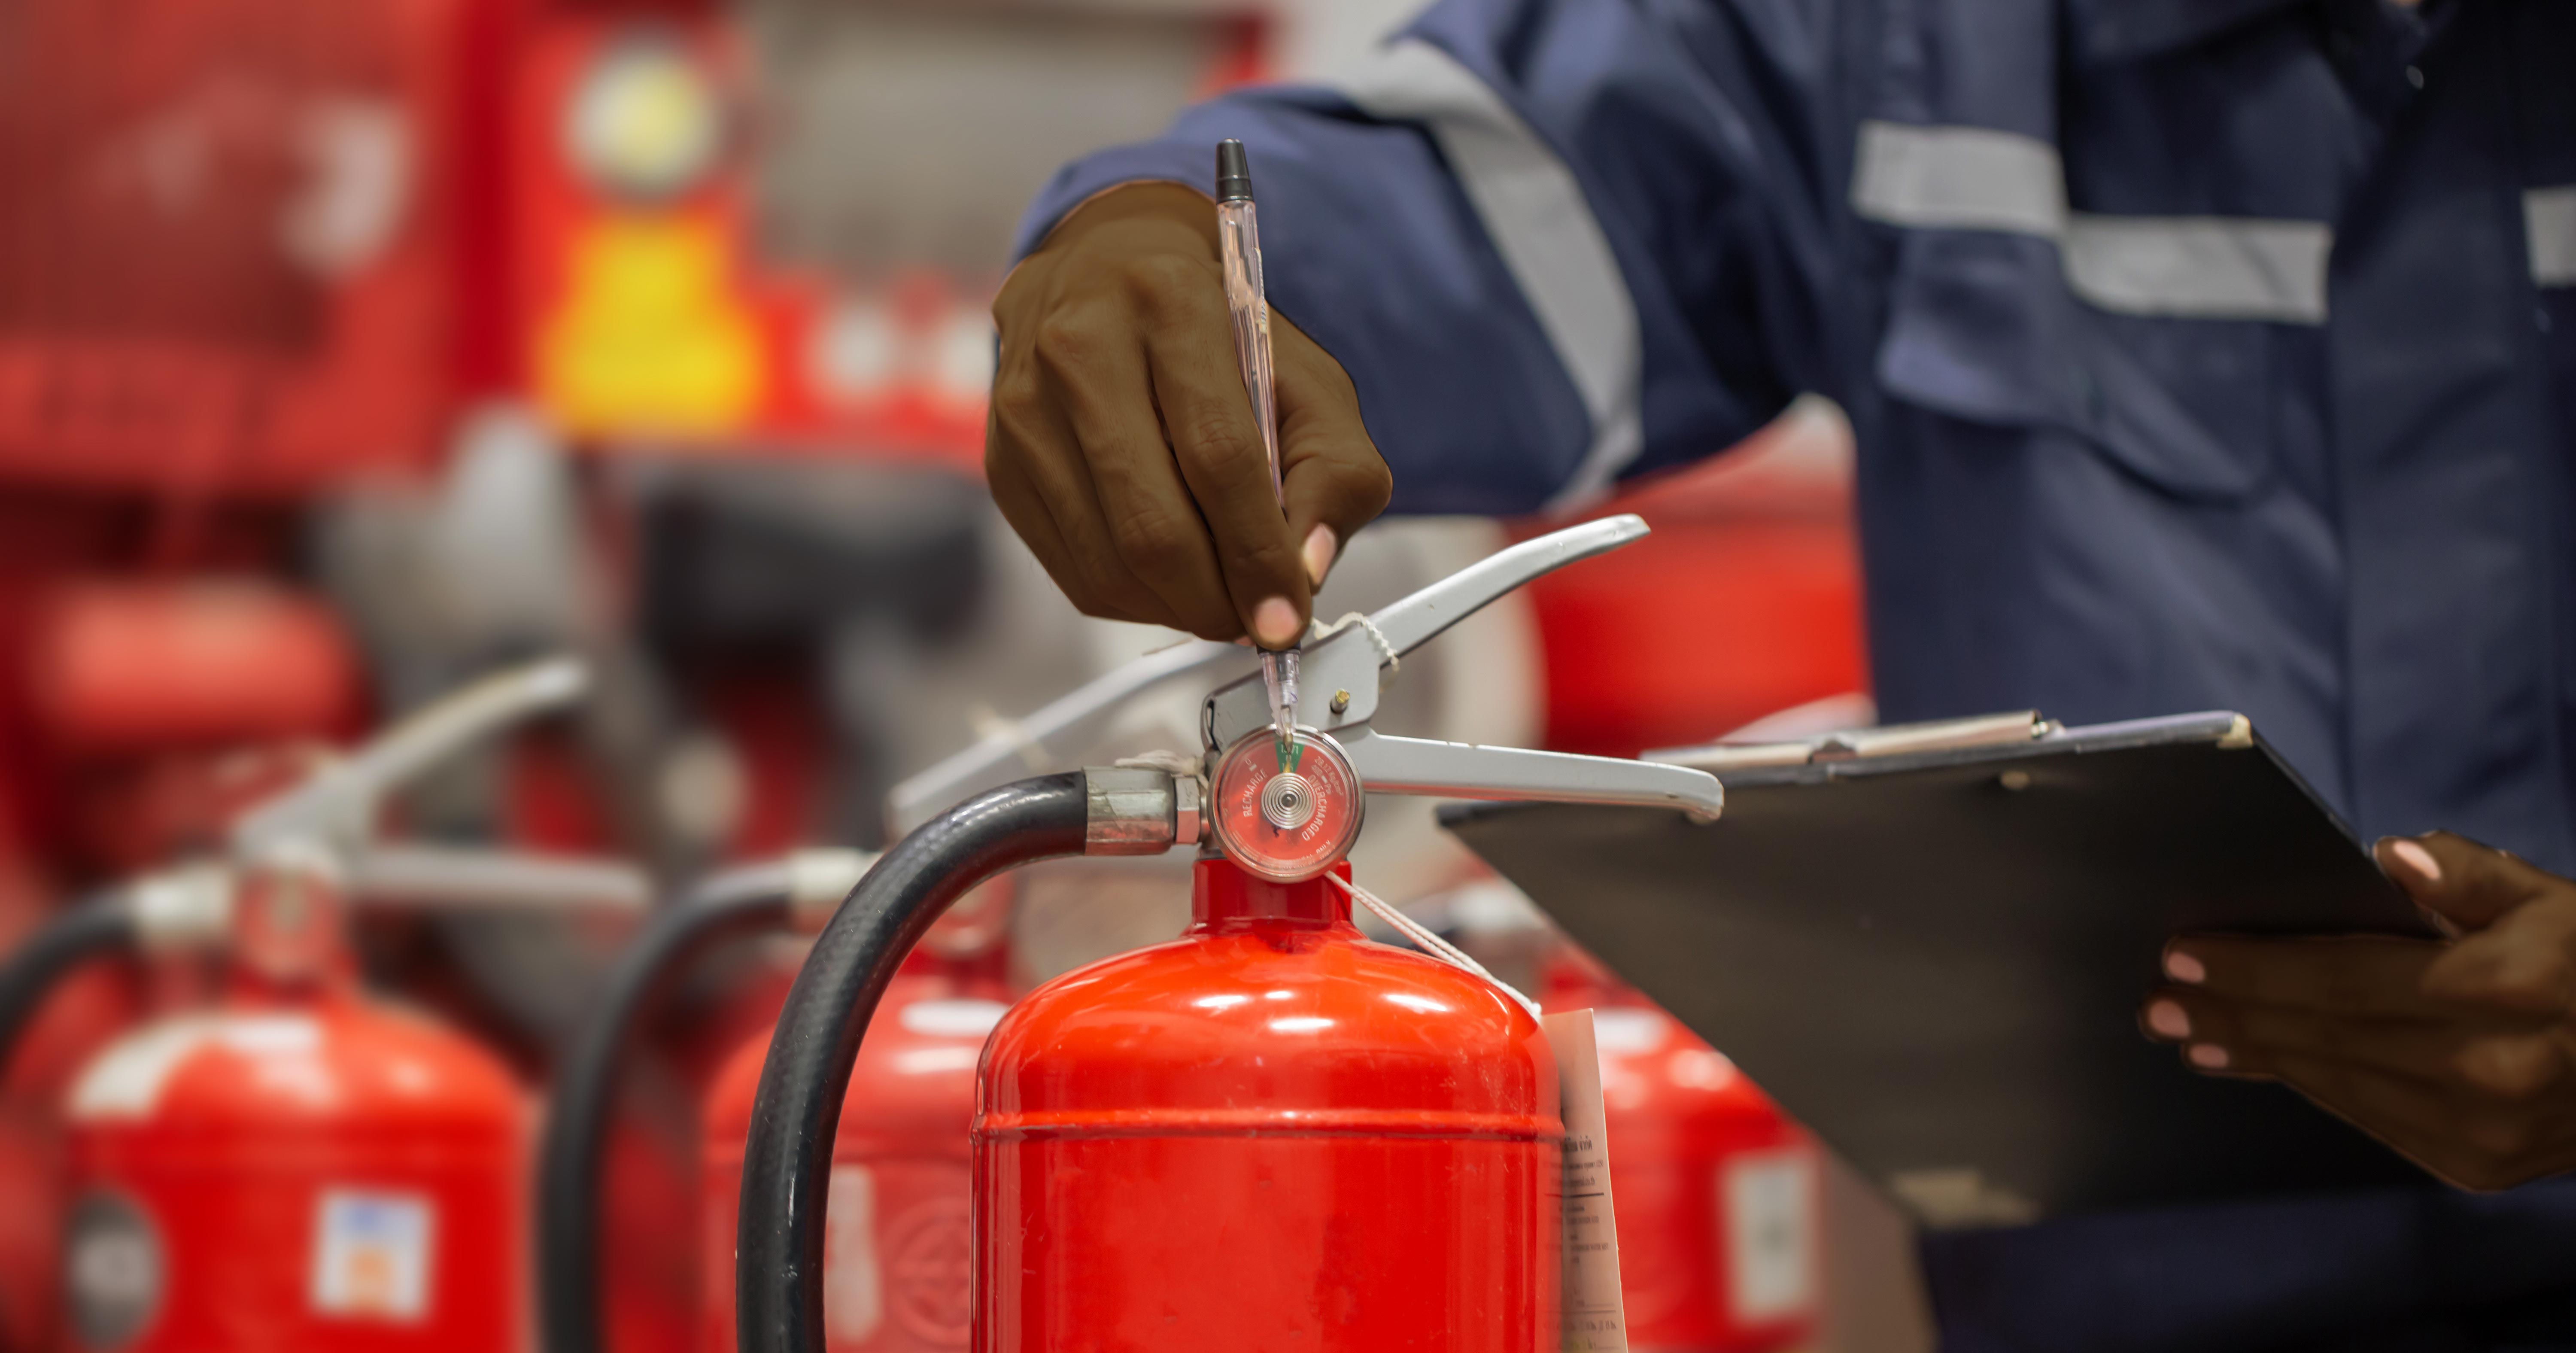 Apave employee inspects a fire extinguisher